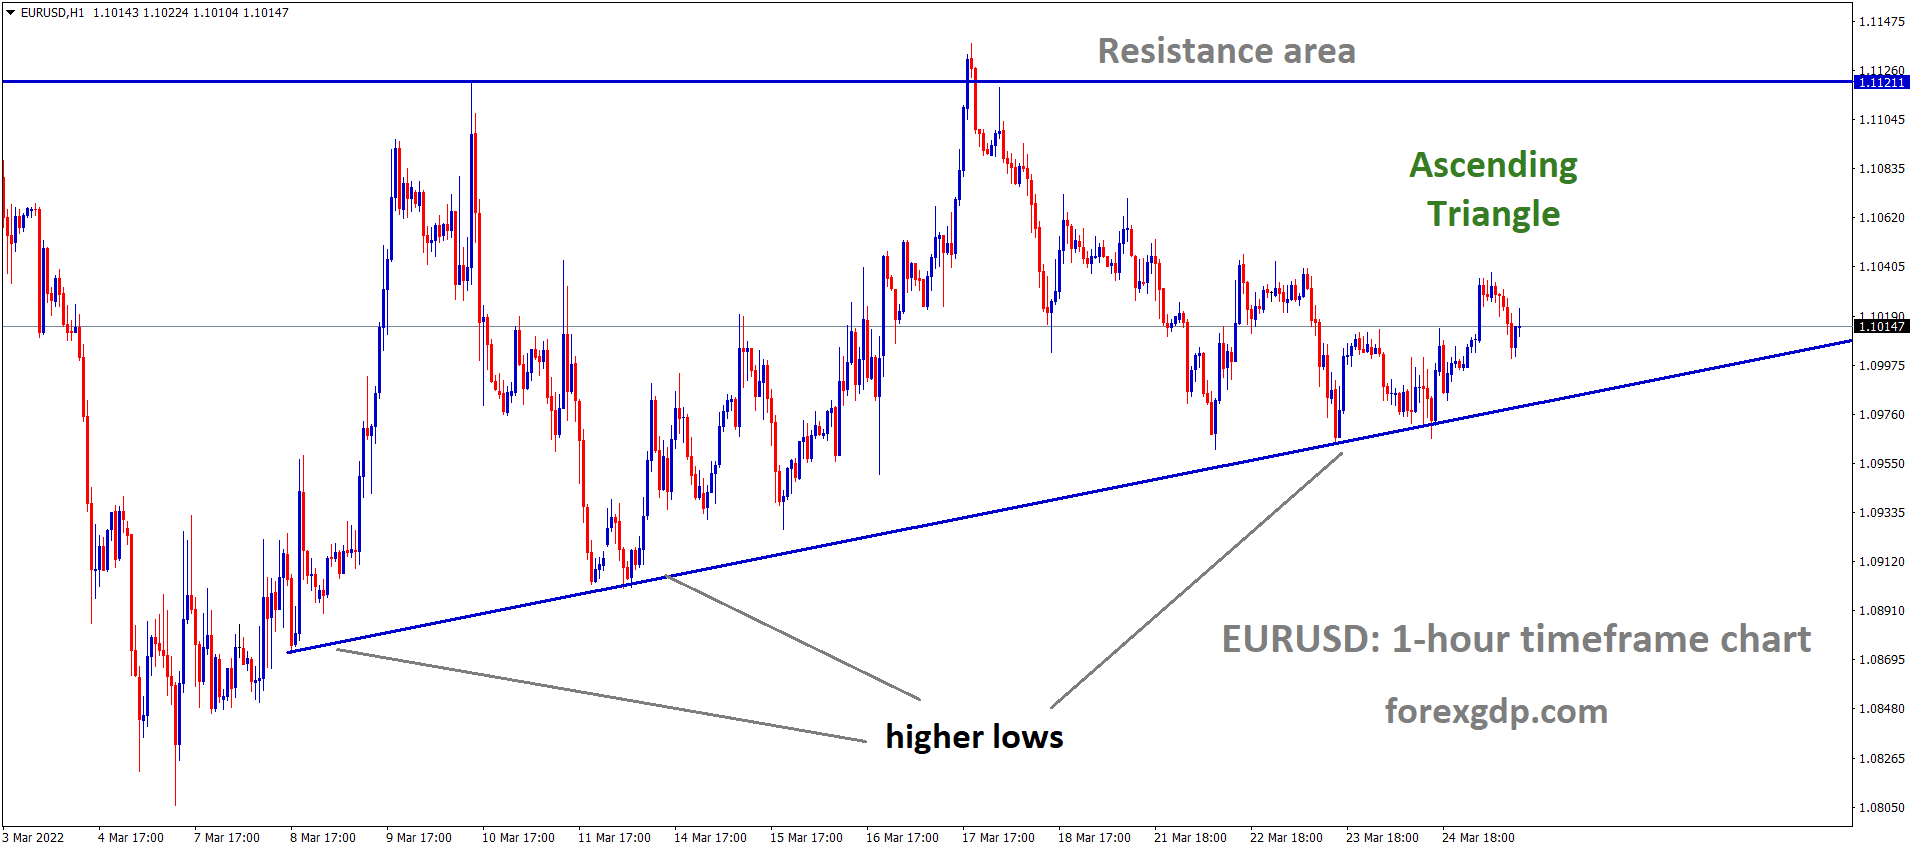 EURUSD H1 Market has rebounded from the higher low area of the Ascending triangle pattern